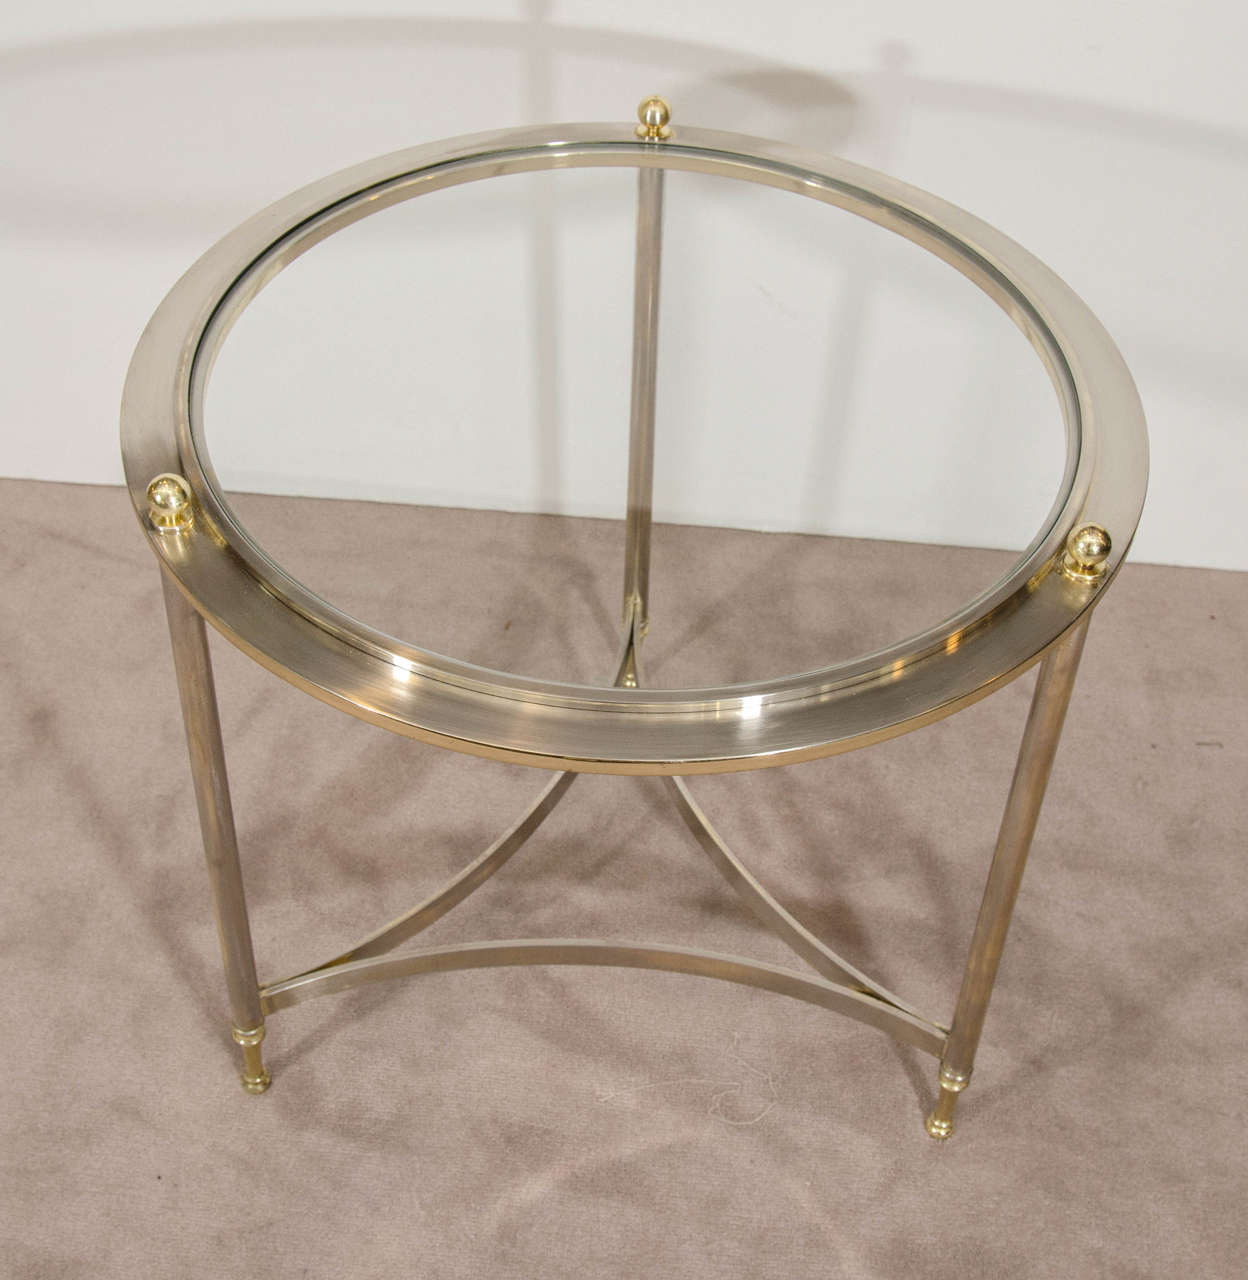 20th Century Midcentury Round Steel Table with Brass Accents by Design Institute of America